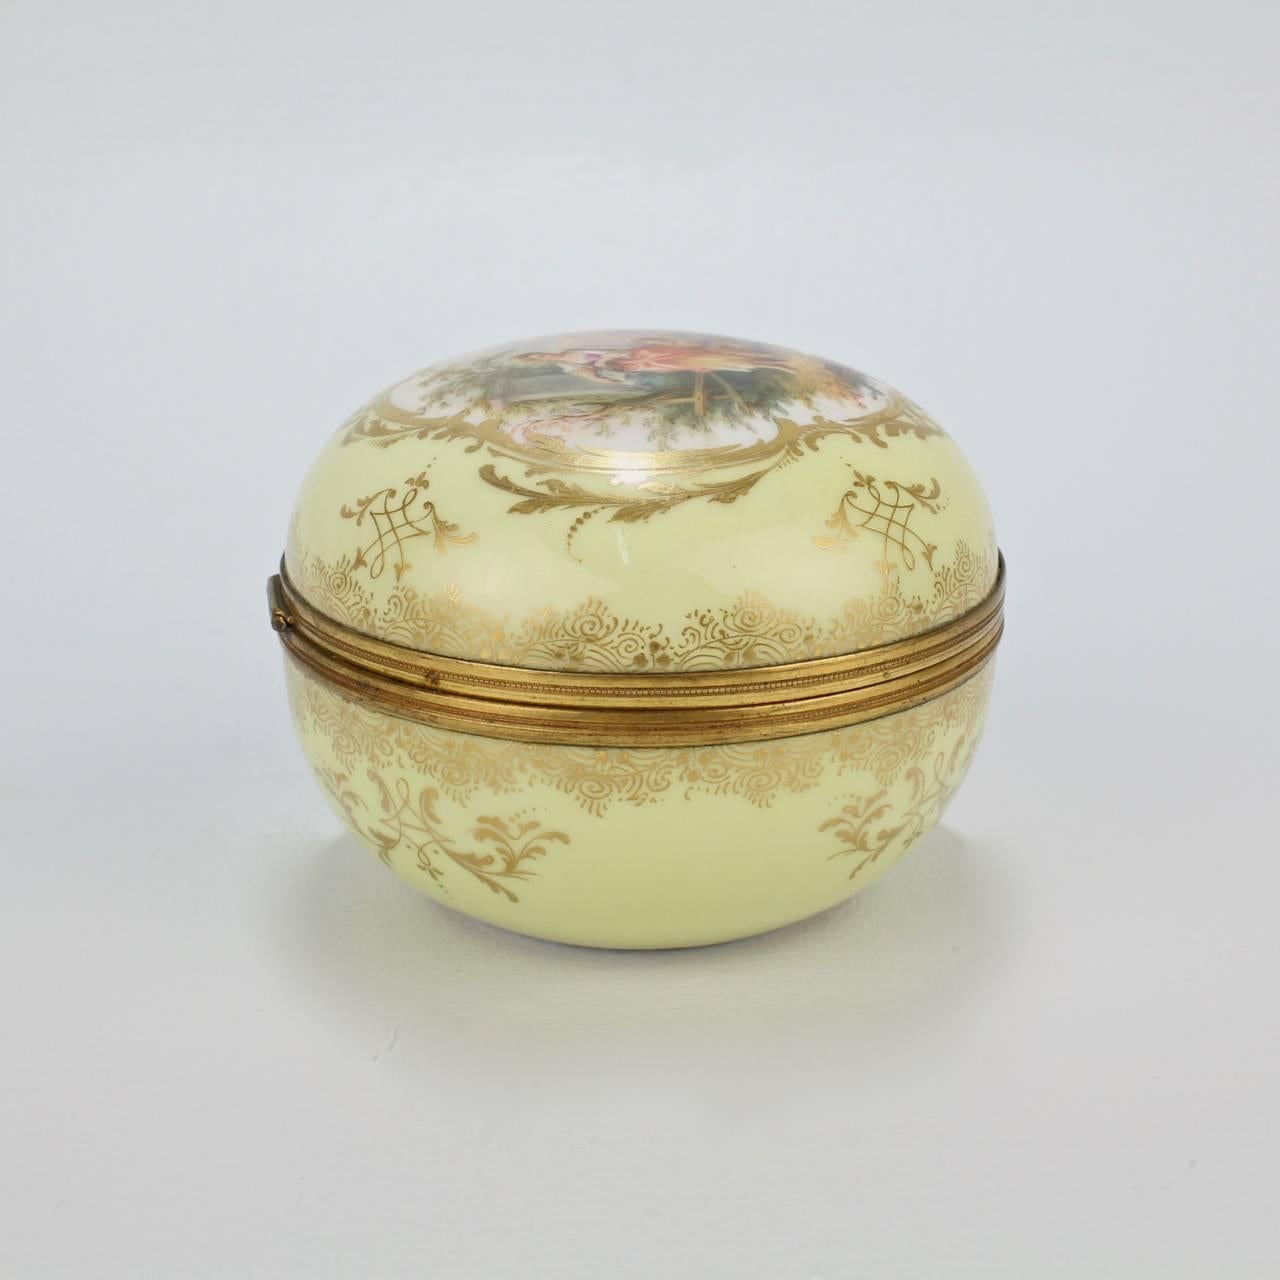 A fine, yellow ground Meissen porcelain box mounted with a gilt bronze frame.

The yellow ground is a relatively rare color for Meissen. The central cartouche on the lid depicts a young beauty in a garden scene together with a child and dog. The